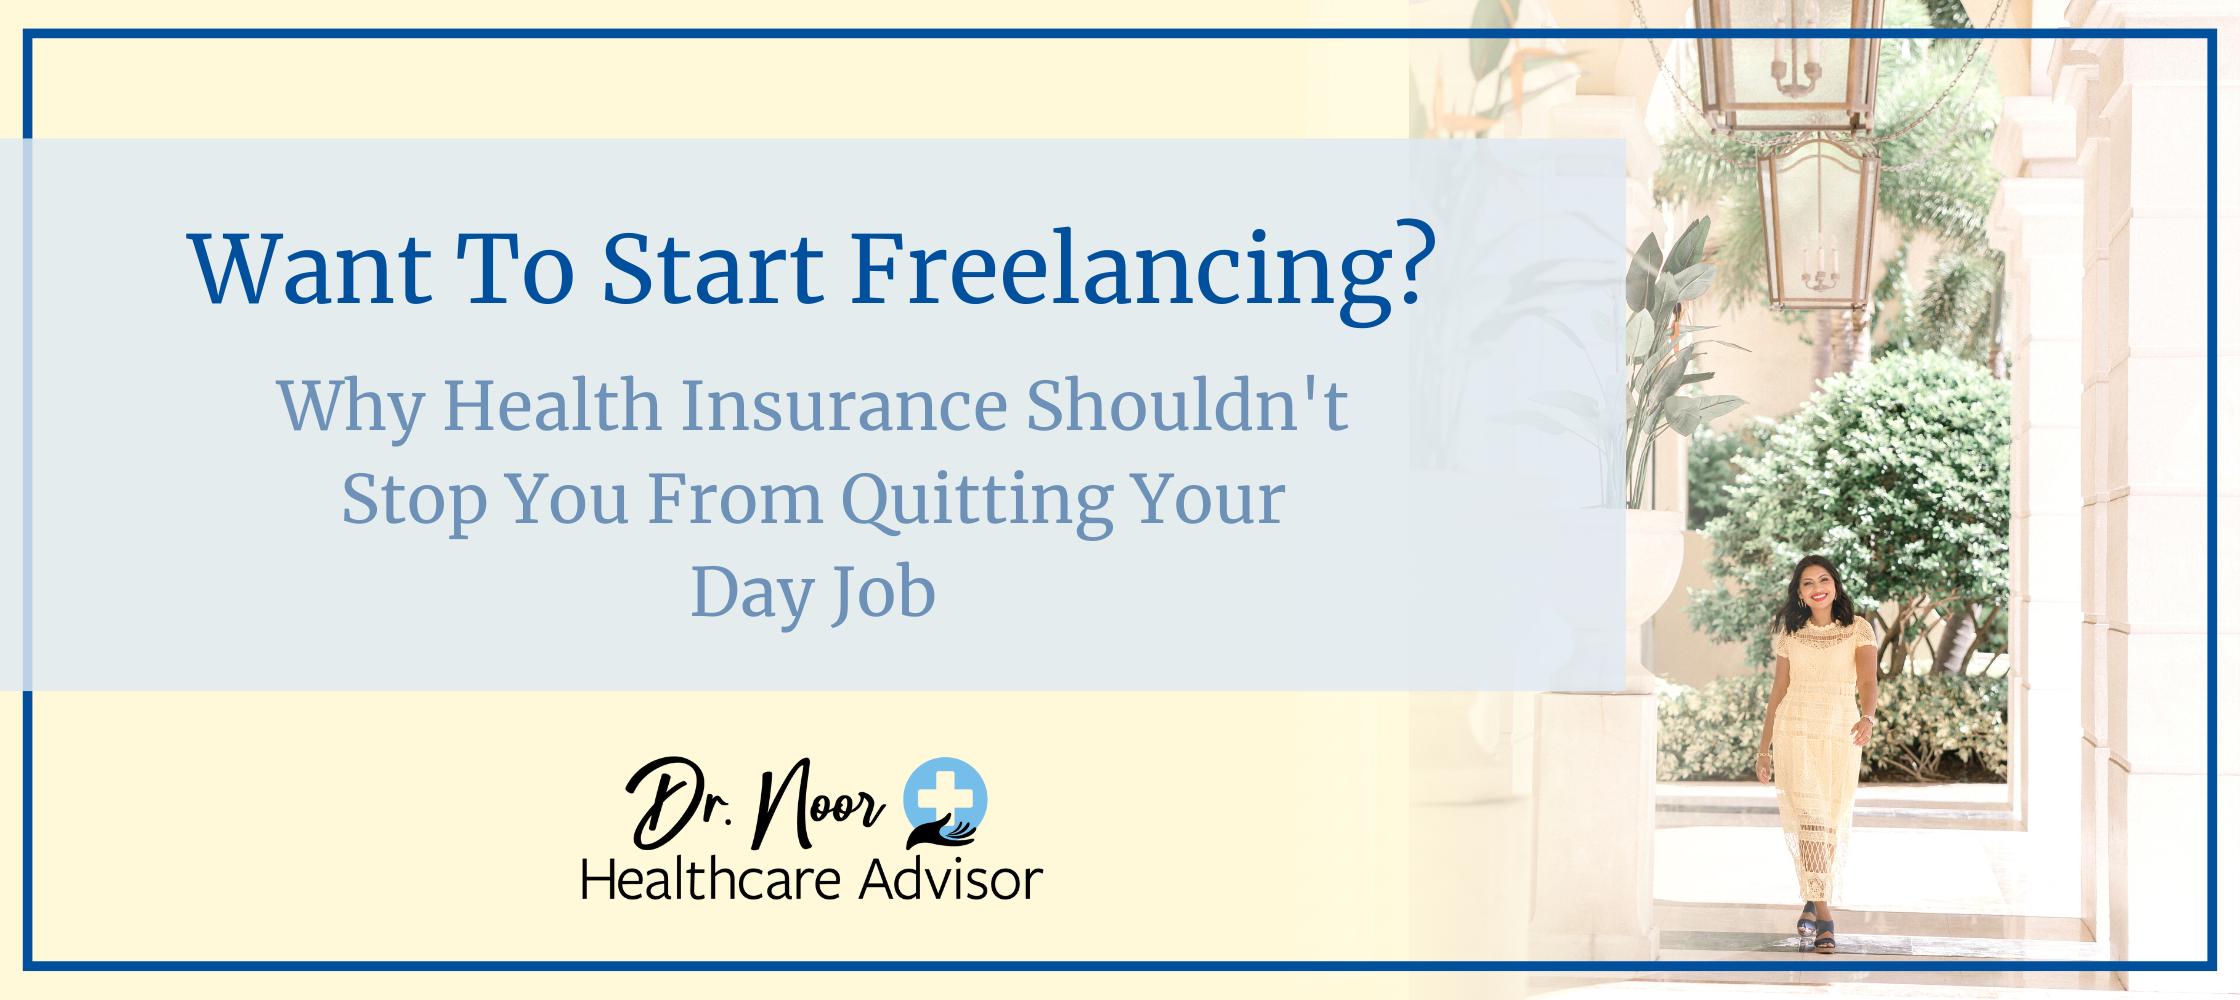 Want to Start Freelancing? Why Health Insurance Shouldn’t Stop You From Quitting Your Day Job